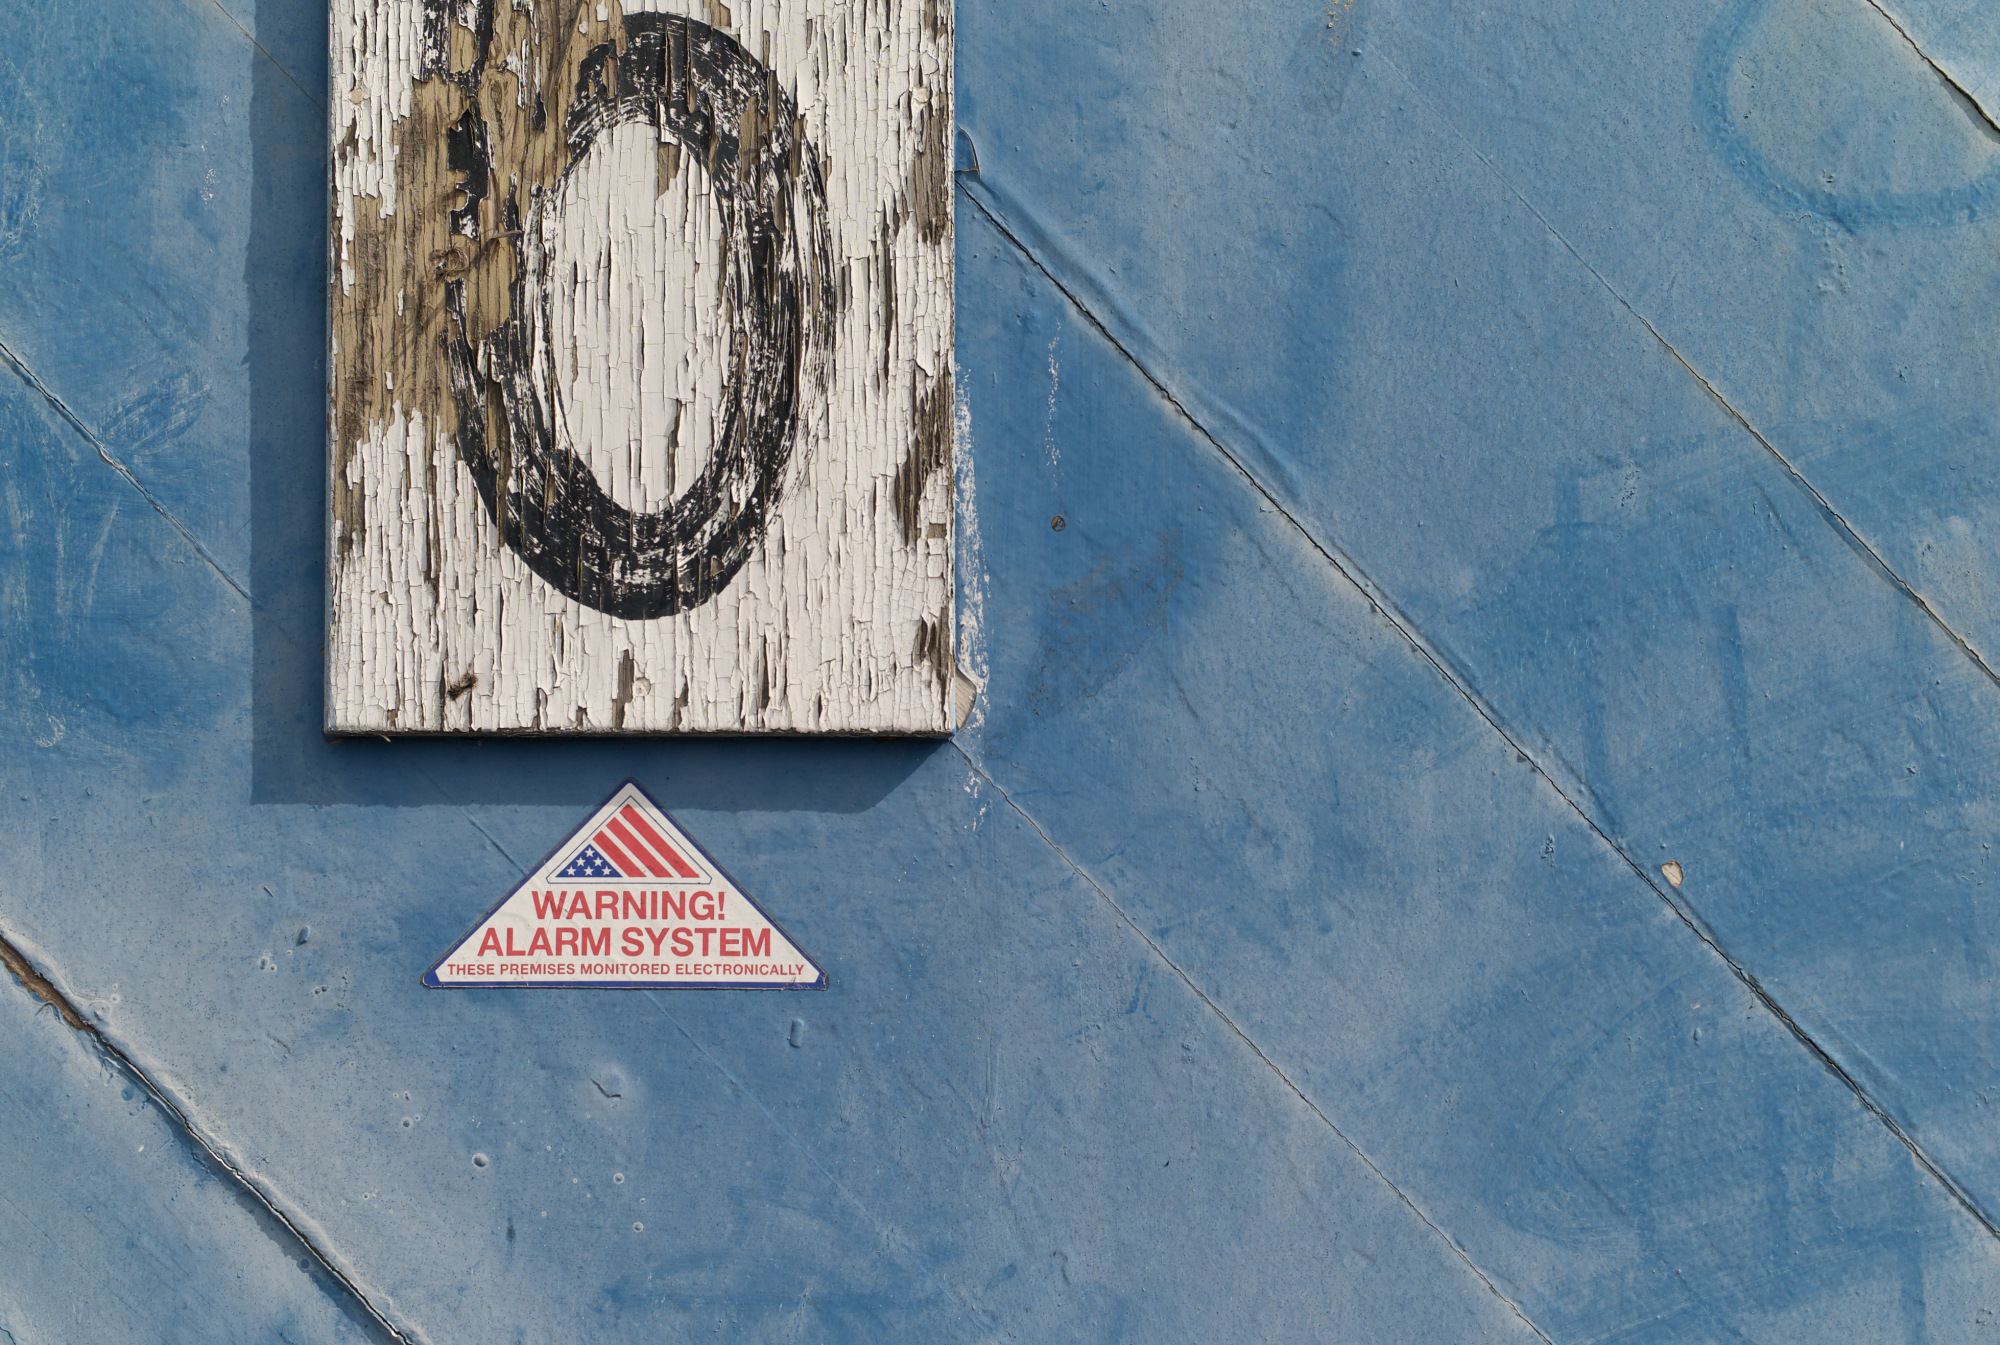 A mysterious photo showing a weathered sign with a zero above a triangular sign reading "Warning Alarm System"